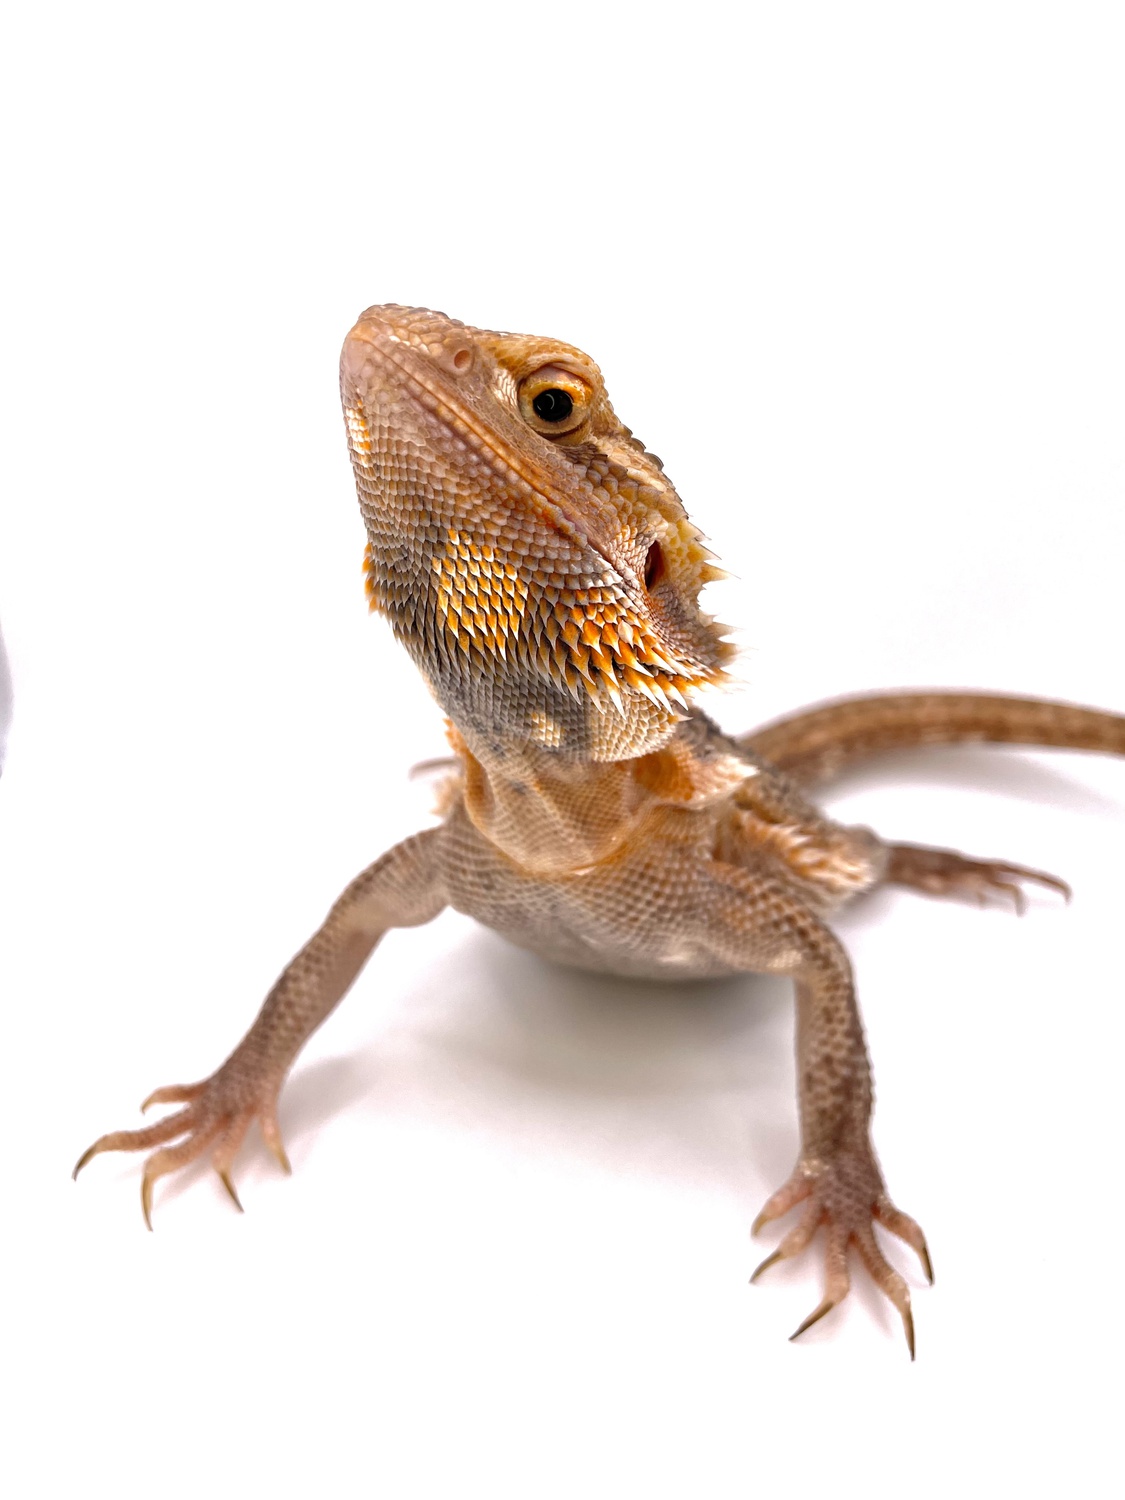 Paradox ‘Thunderbolt’ Genetic Stripe Trans Central Bearded Dragon by Killer Clutches